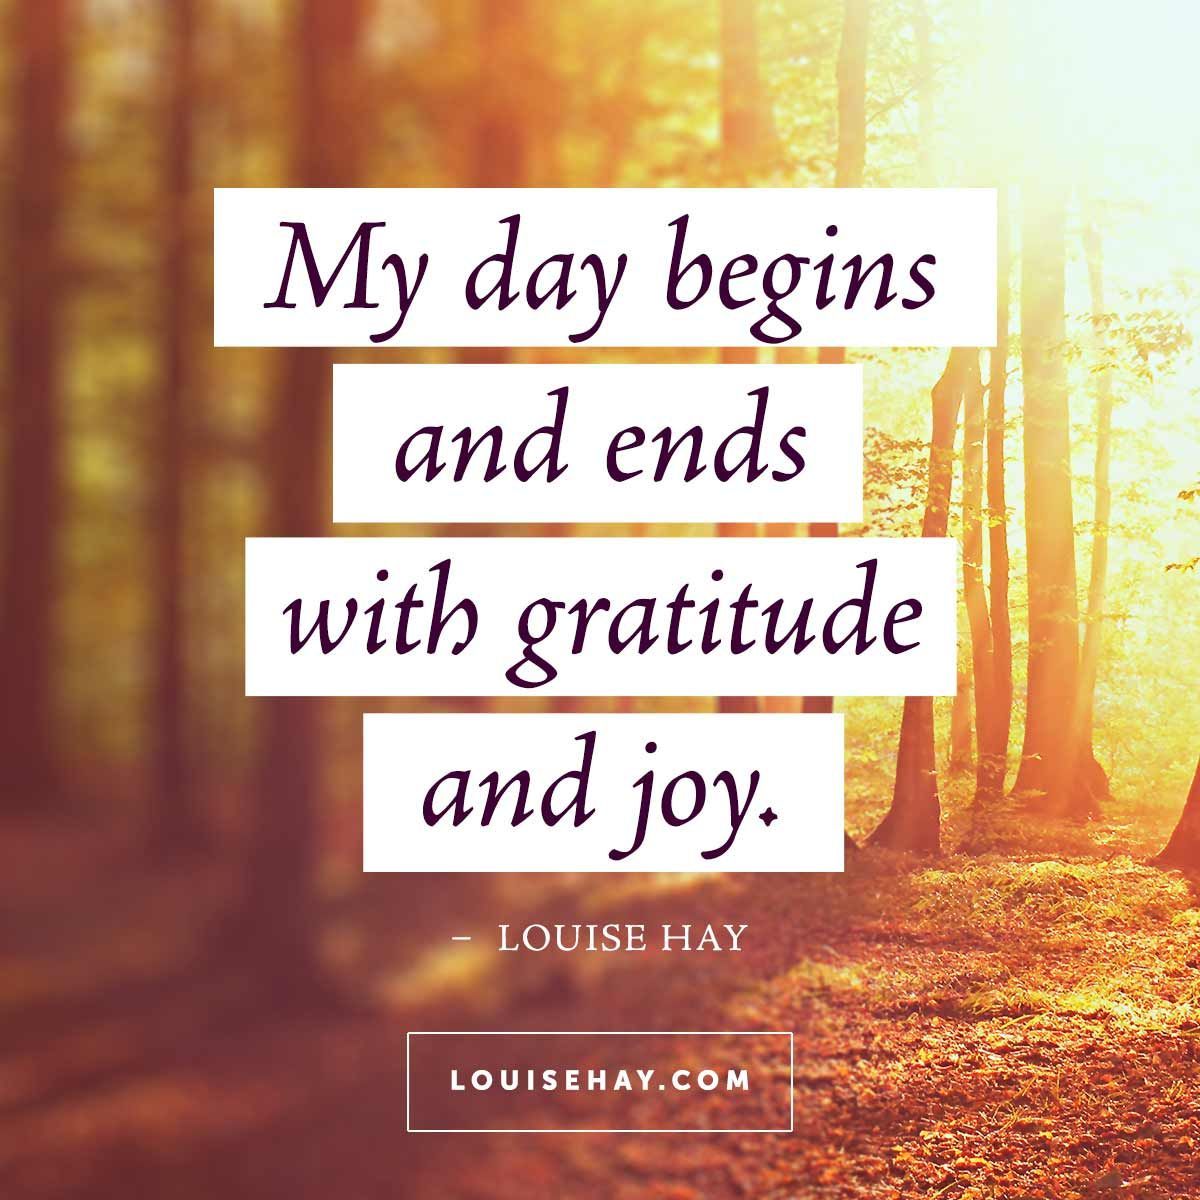 // My day begins and ends with gratitude and joy. – Louise Hay Affirmations #quotes